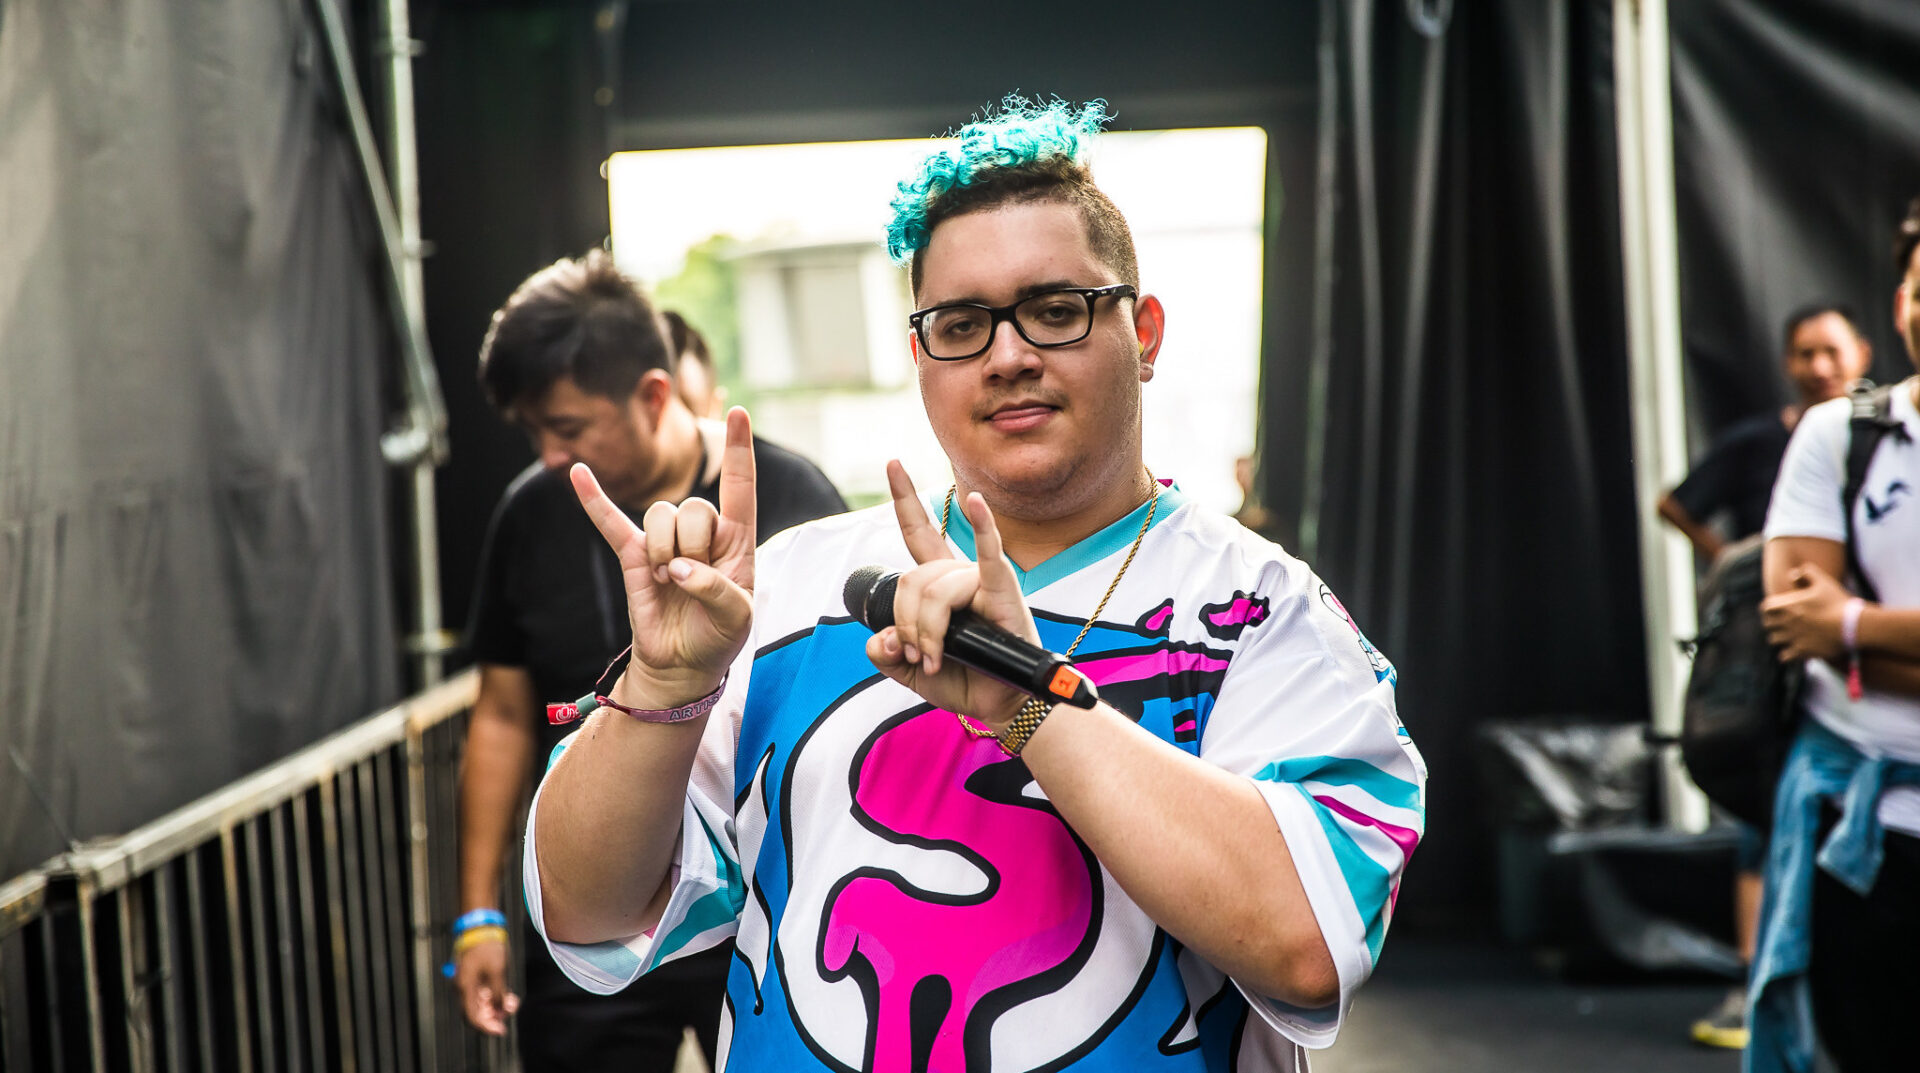 Slushii celebrates his new song “There X2” with There X2 Tour